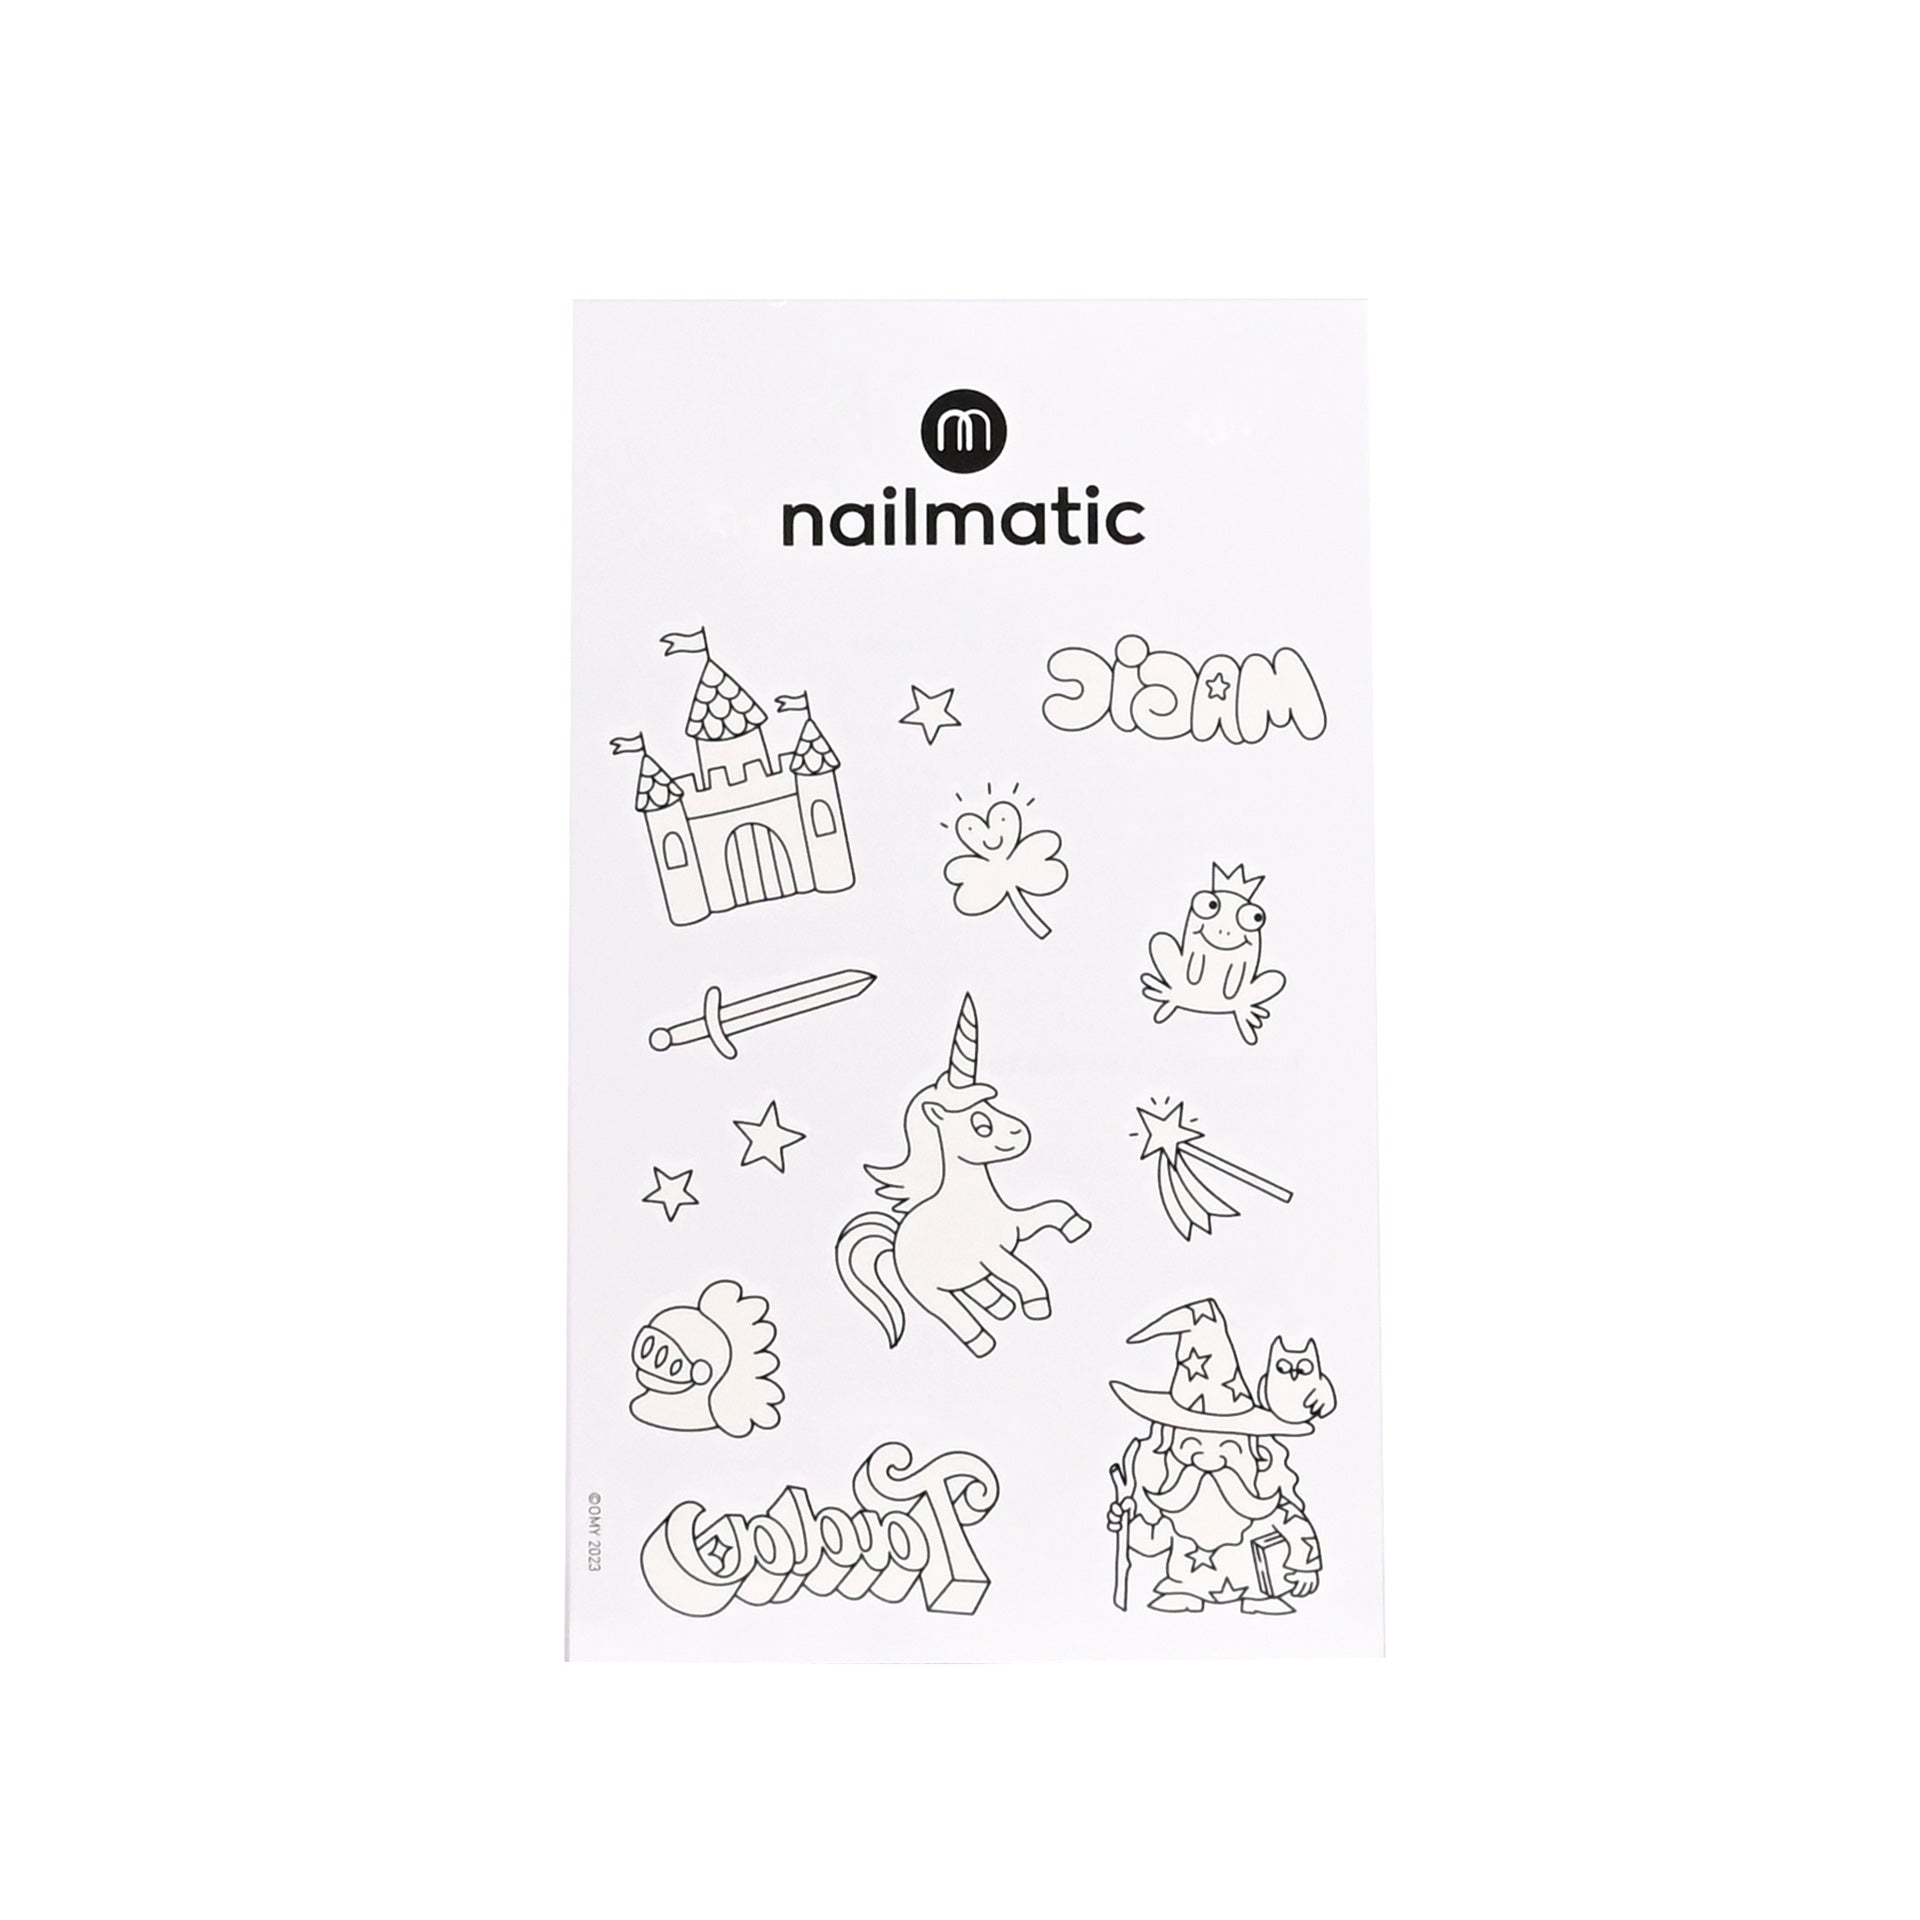 Temporary tattoos to color | Magical world